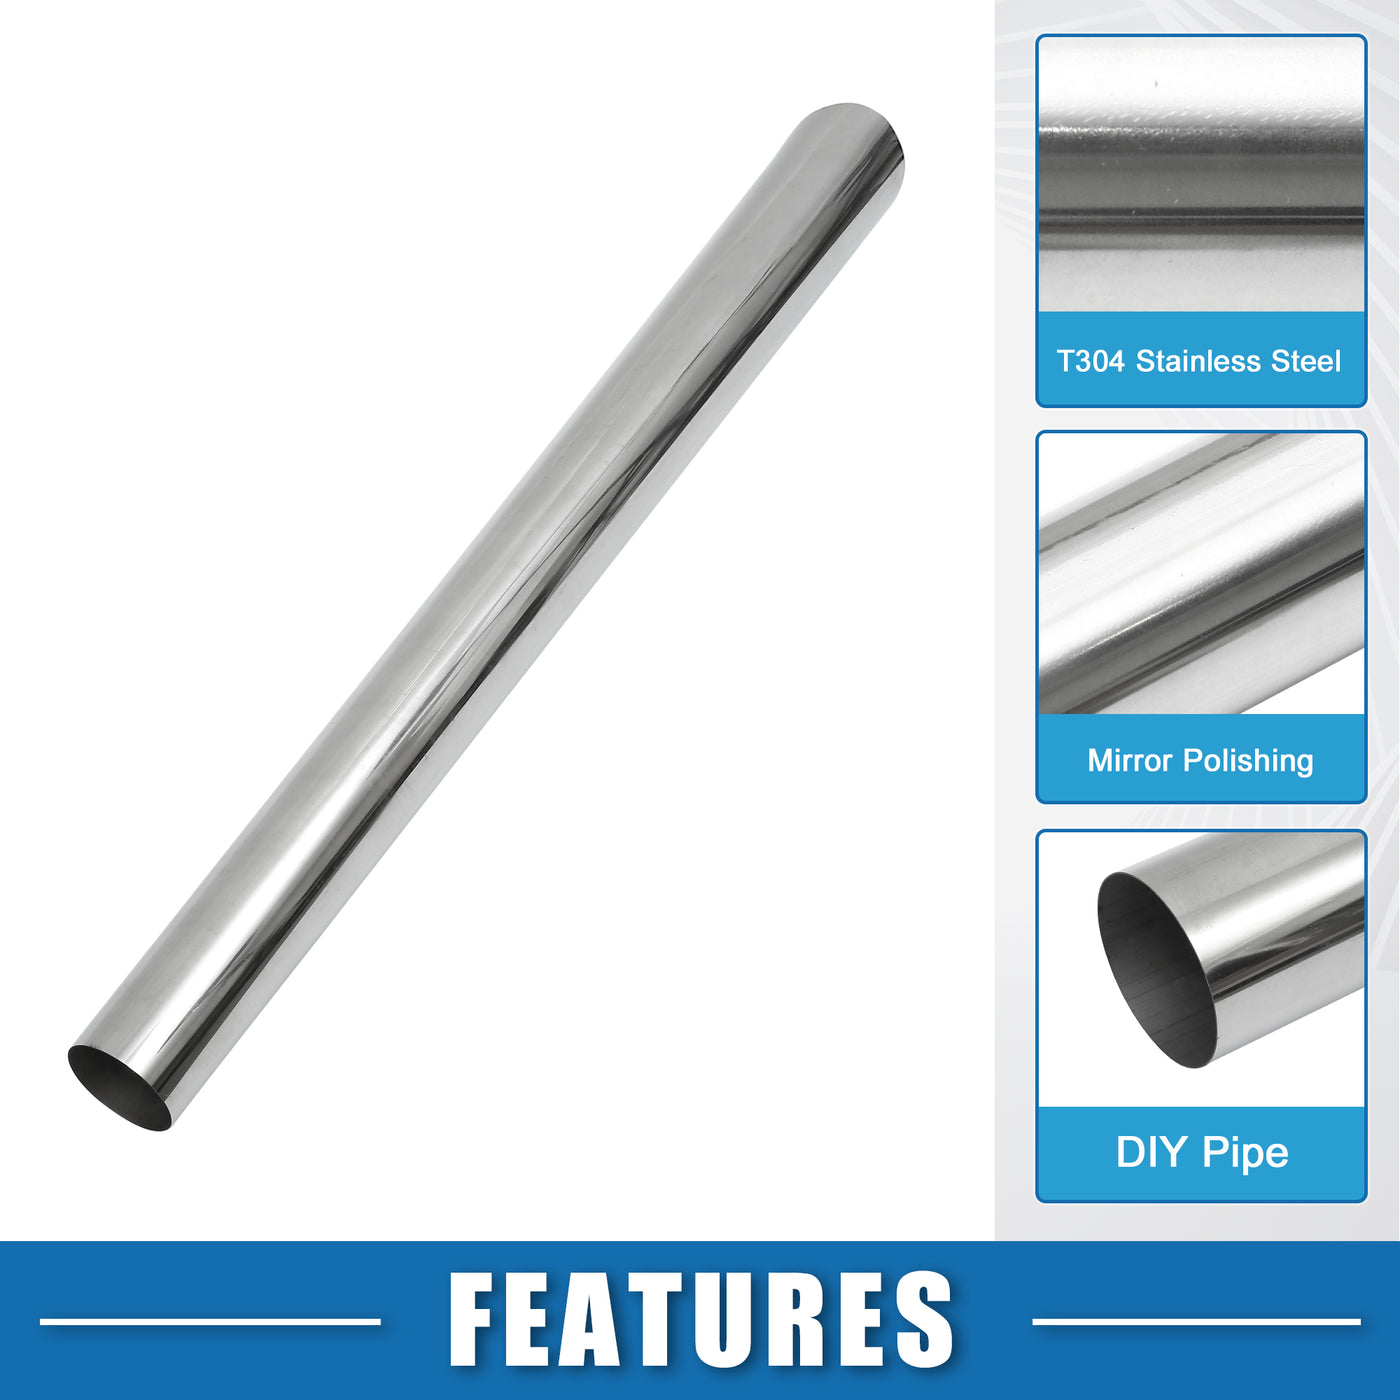 A ABSOPRO Car Mandrel Exhaust Pipe Tube Durable 48" Length 5'' OD Straight Exhaust Tube DIY Custom 0 Degree Modified Piping T304 Stainless Steel (Set of 2)